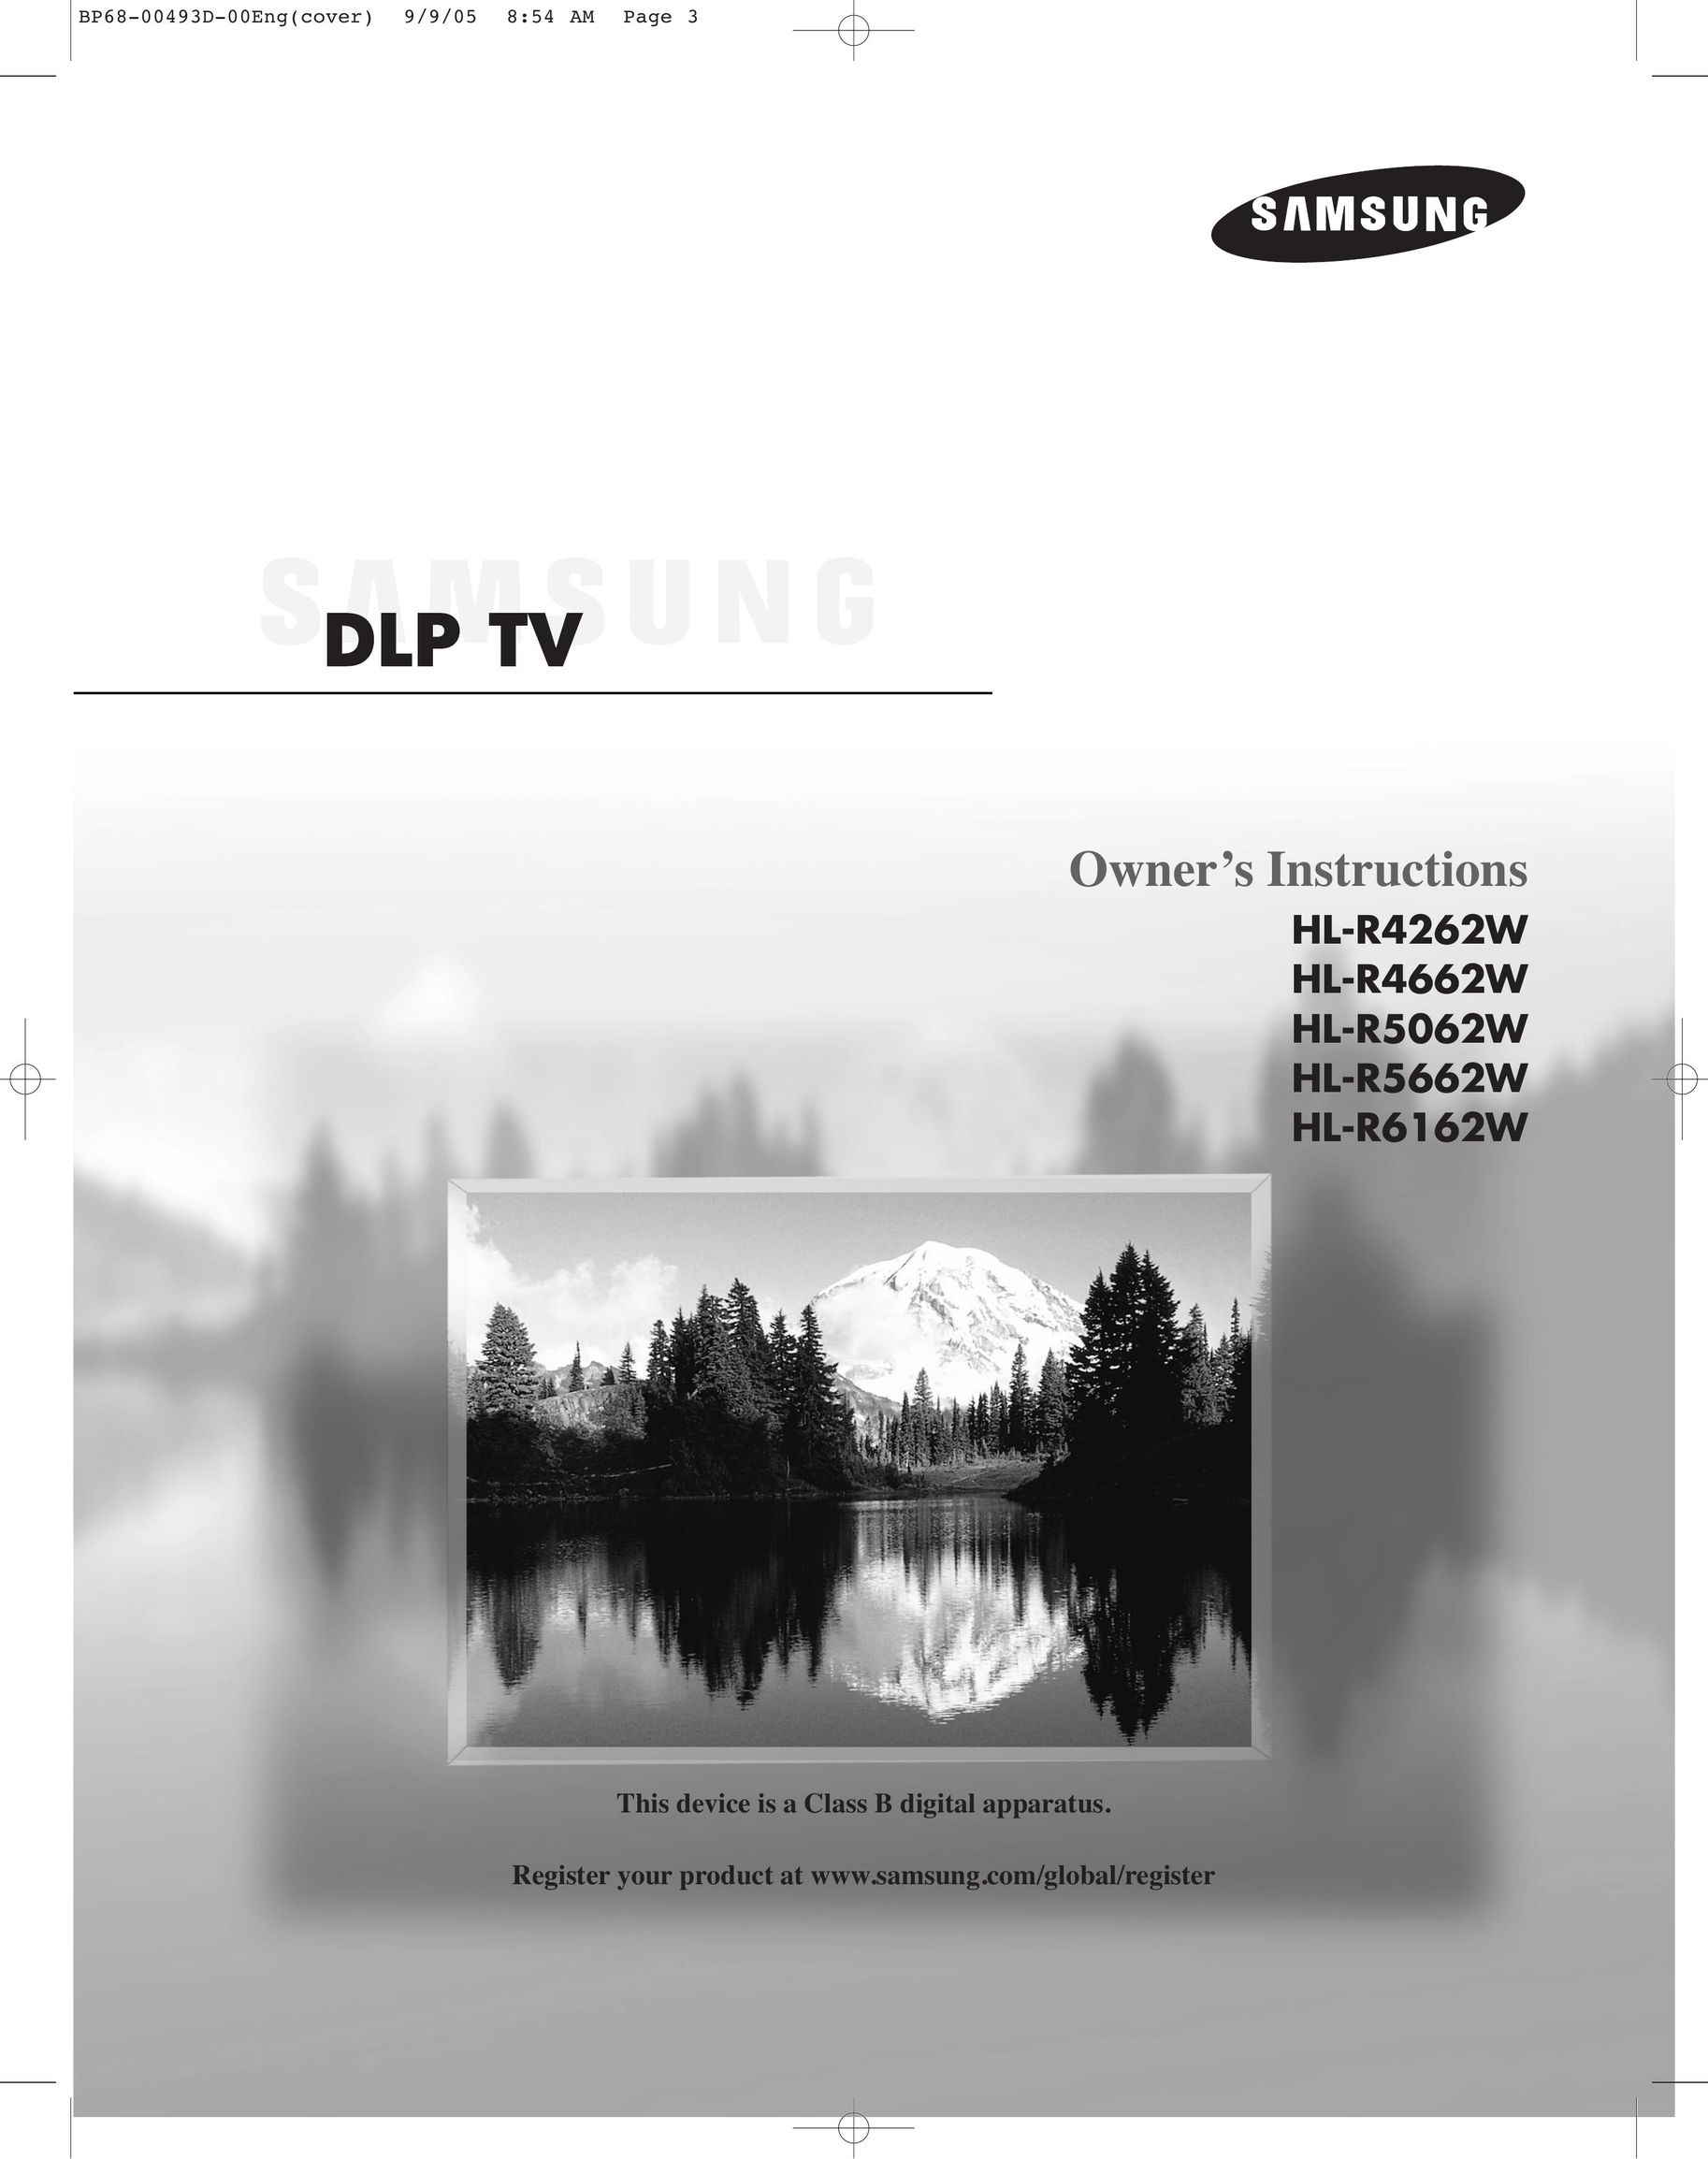 Samsung BP68-00493D-00 Projection Television User Manual